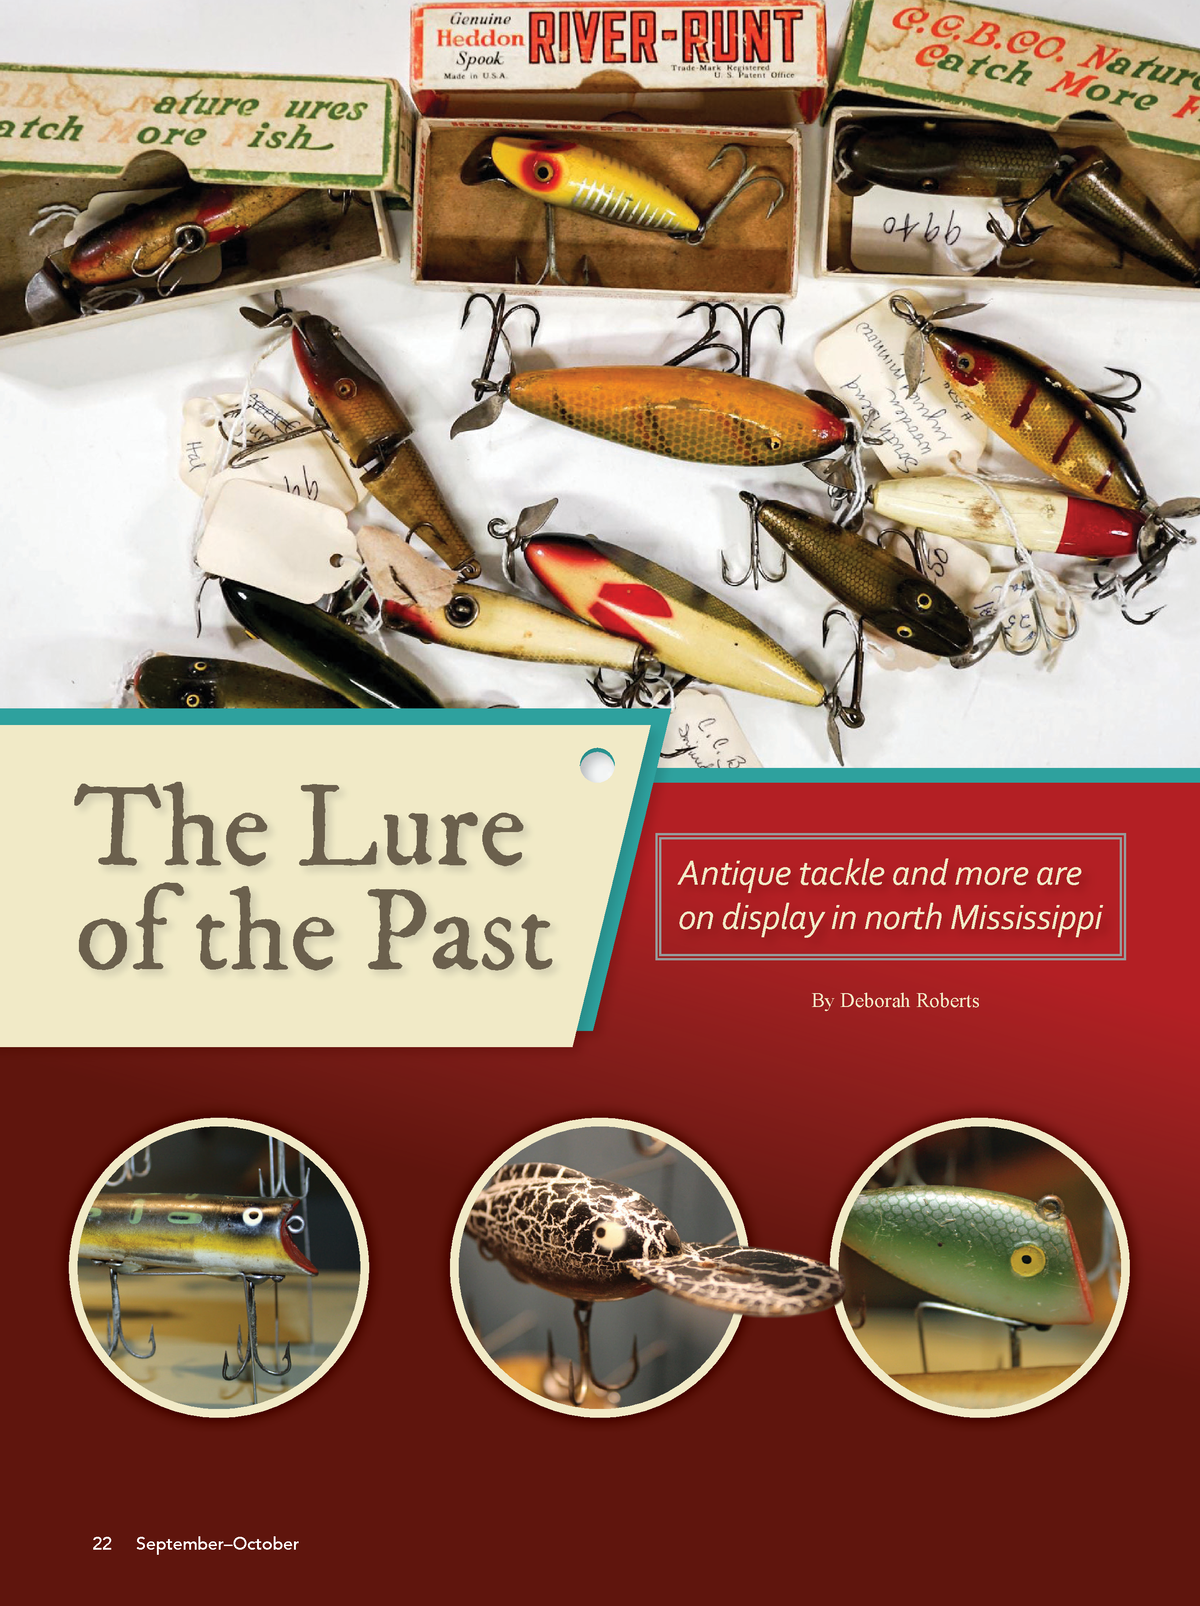 The lures of the past - AN introduction to the early history of